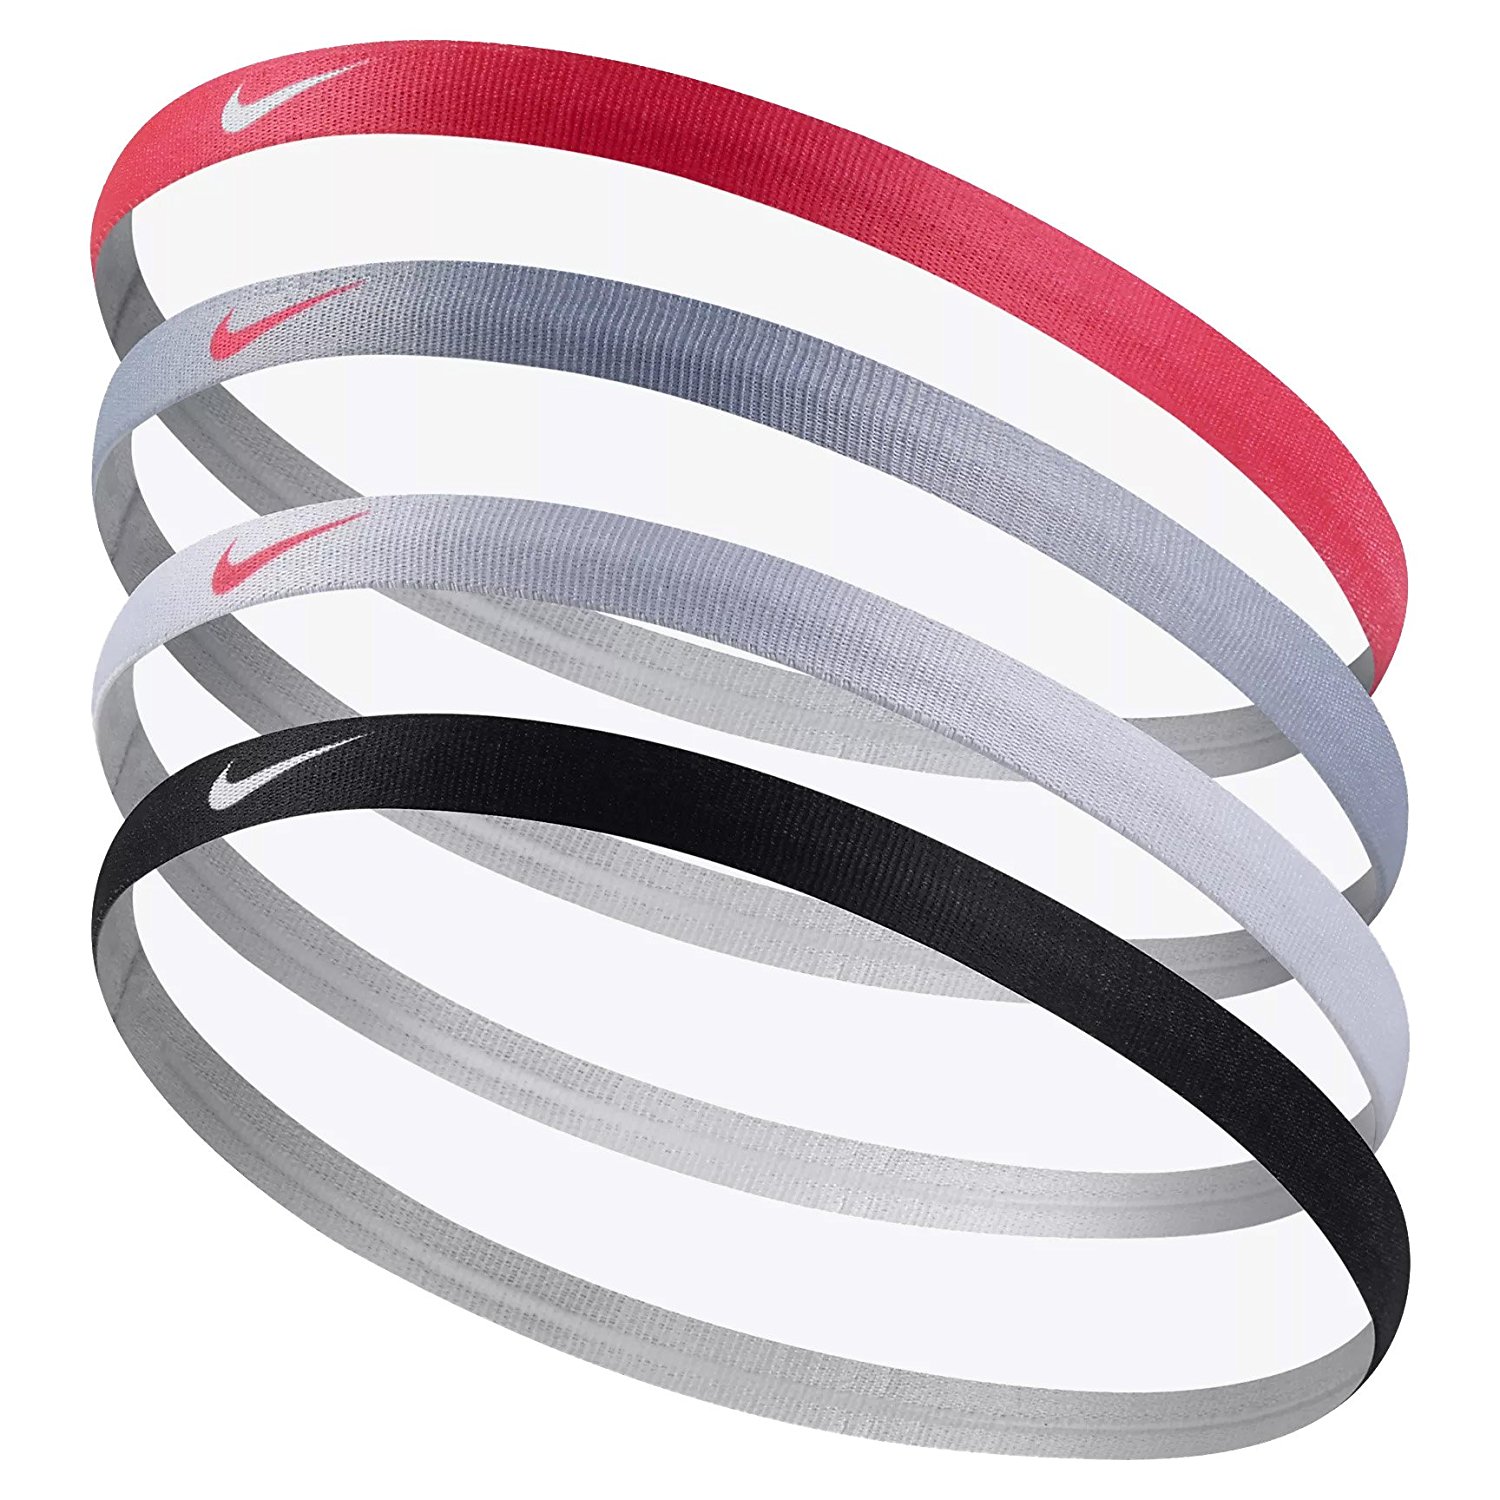 Nike Girls Assorted Headband Hair Bands 4 Pack, Silicone for Grip - image 2 of 2